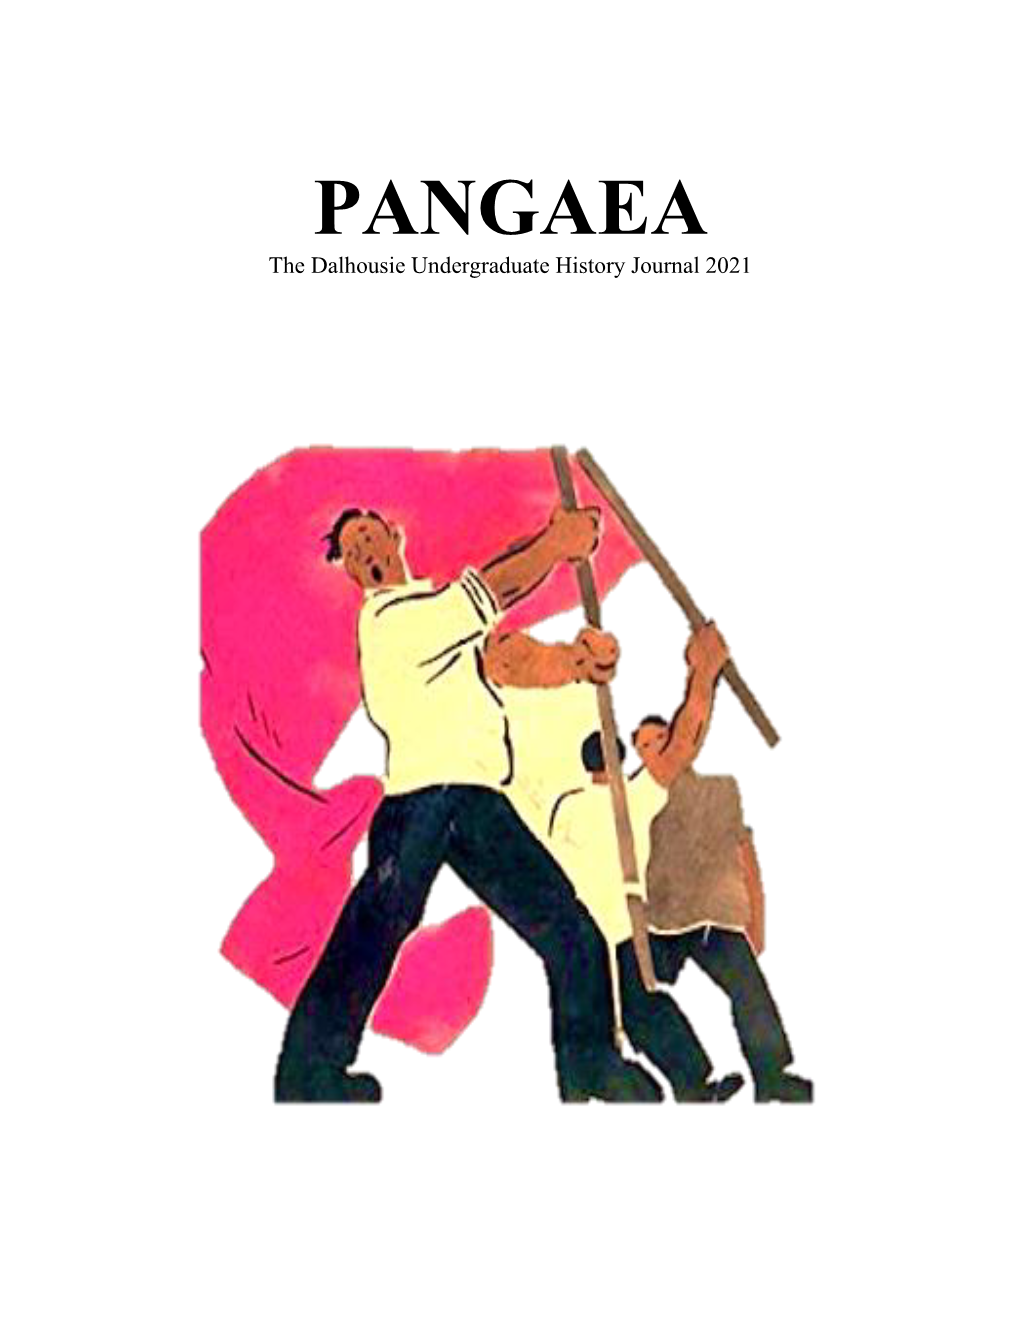 Pangaea 2021 Also Includes Reflections from This Year’S Honours Students